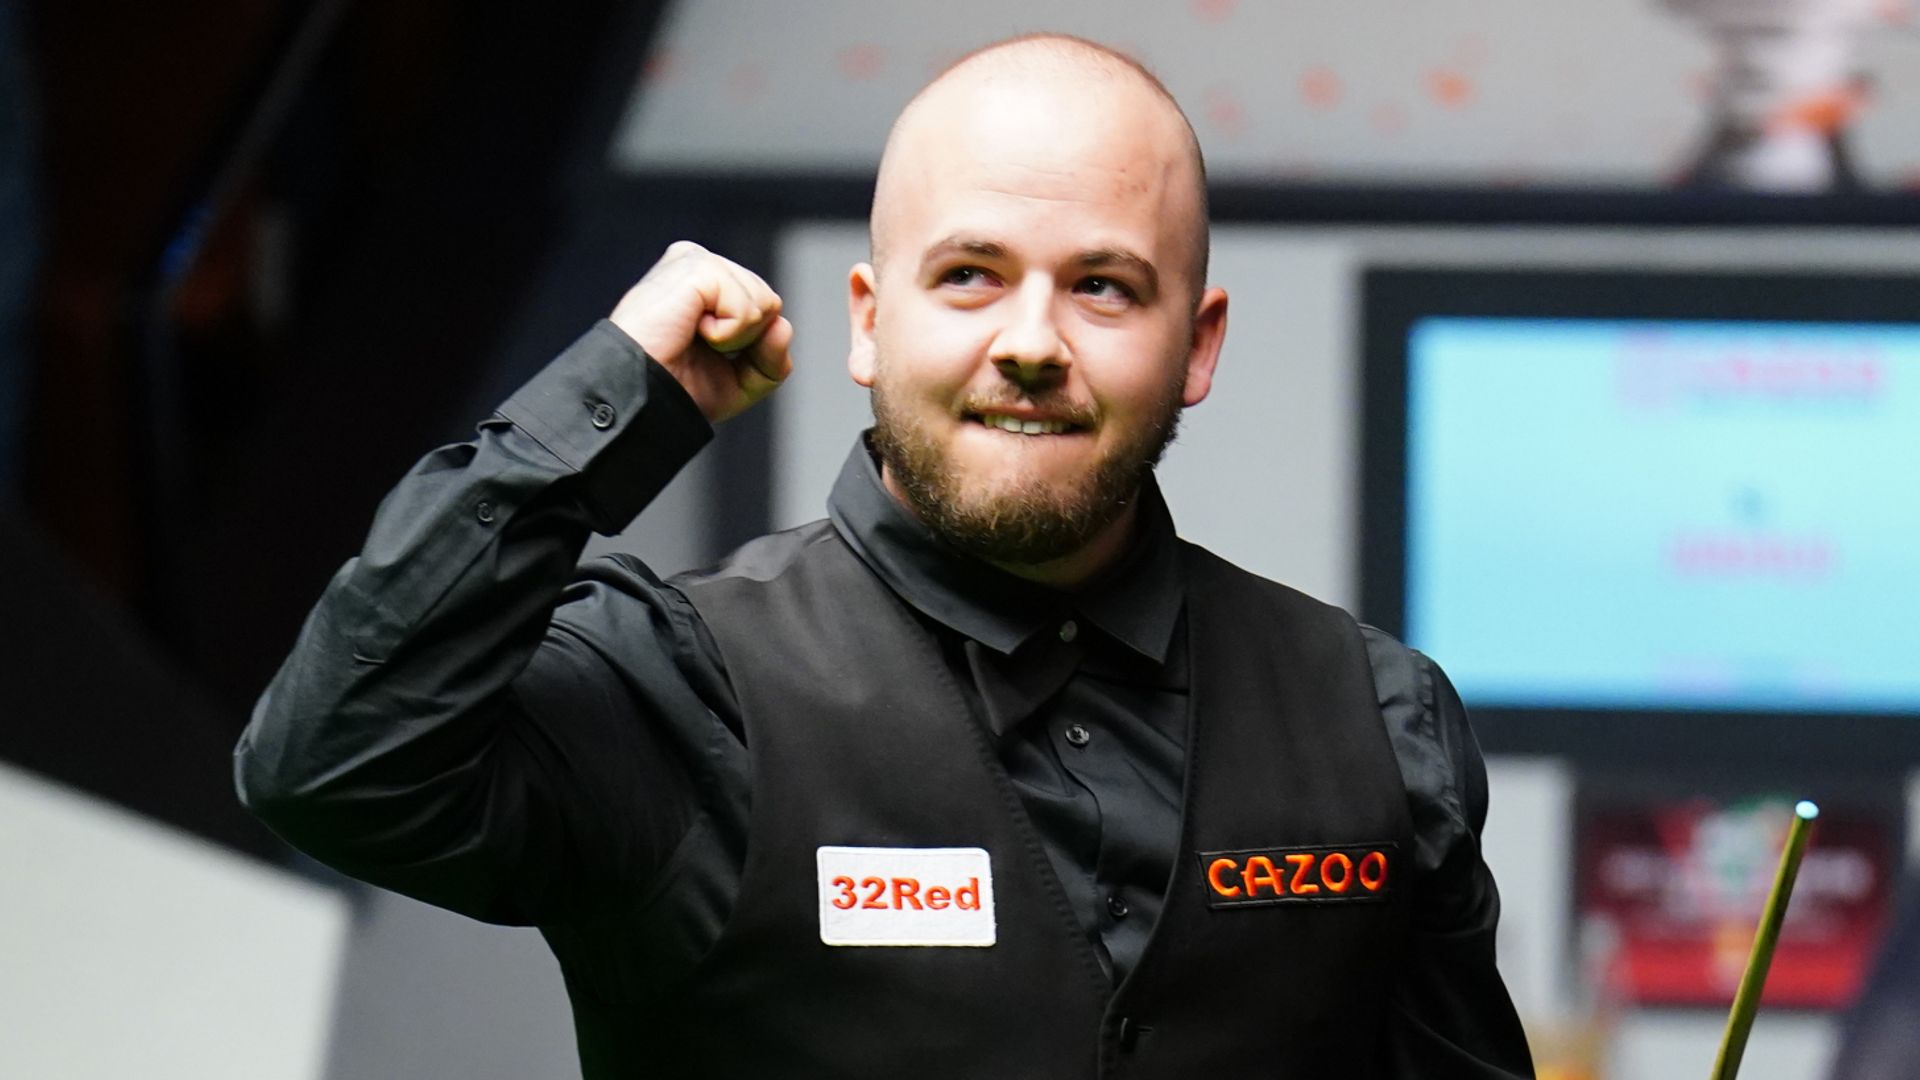 Brecel produces greatest Crucible comeback to reach final